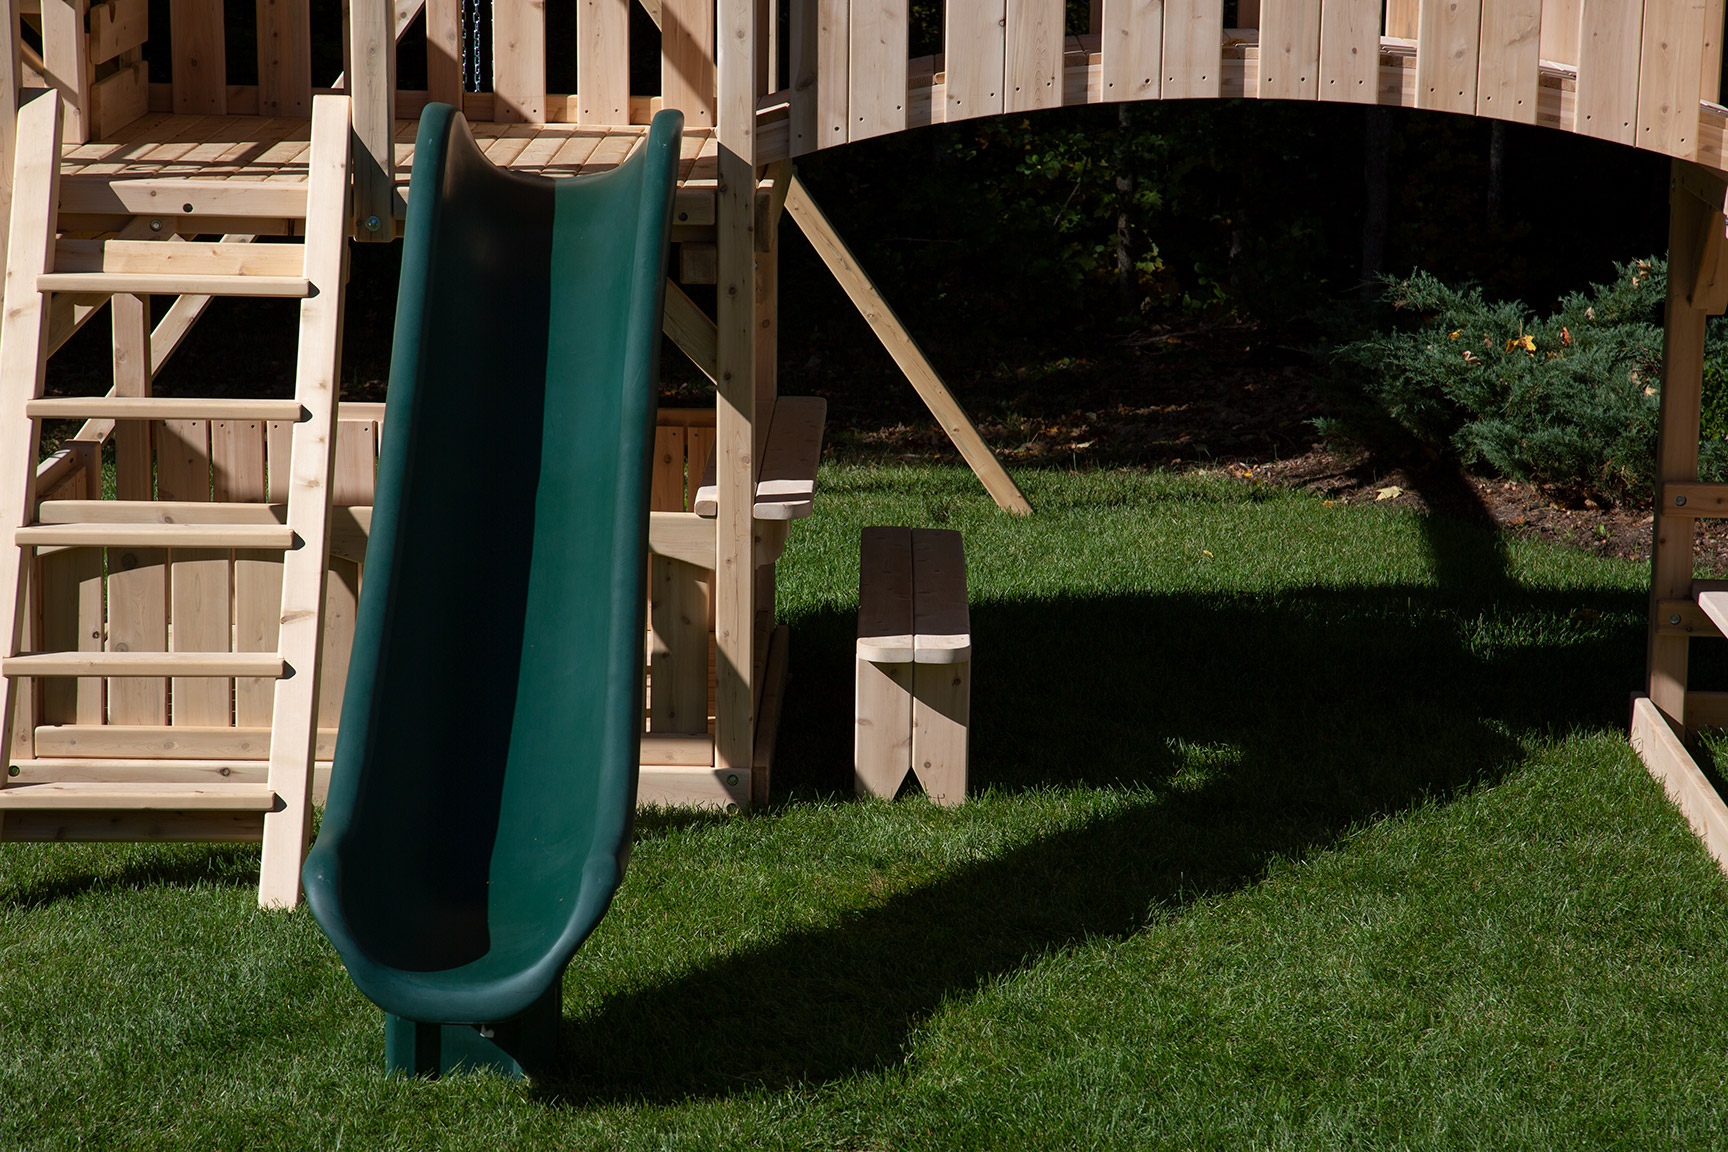 Triumph Play System's diamond tower and green tube slide.